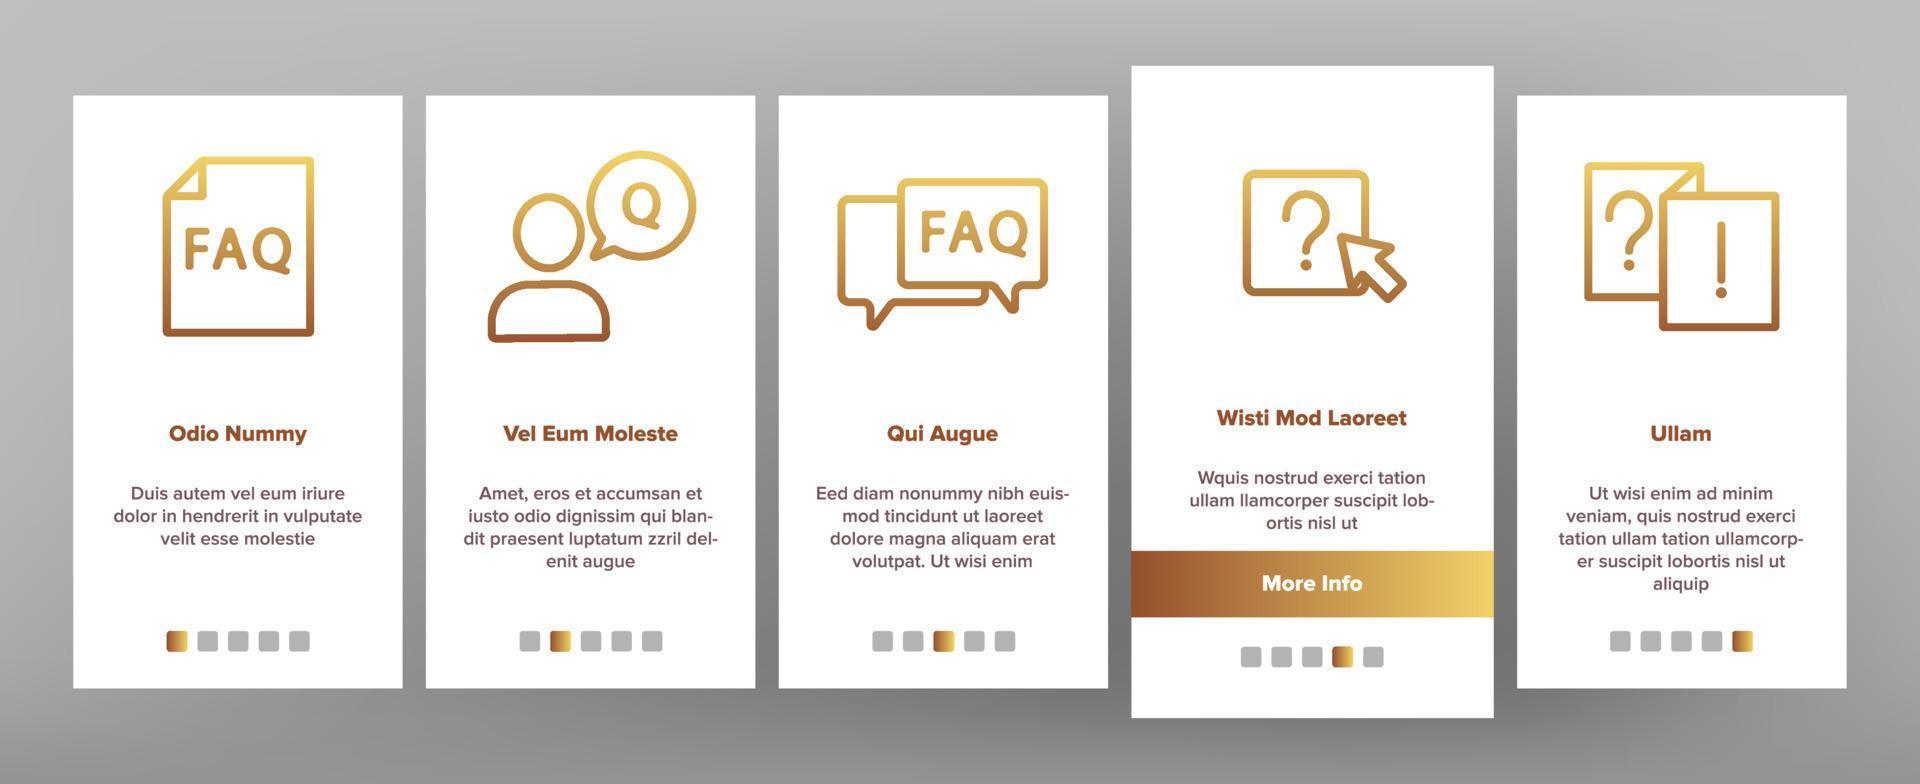 Faq Frequently Asked Questions Onboarding Set Vector